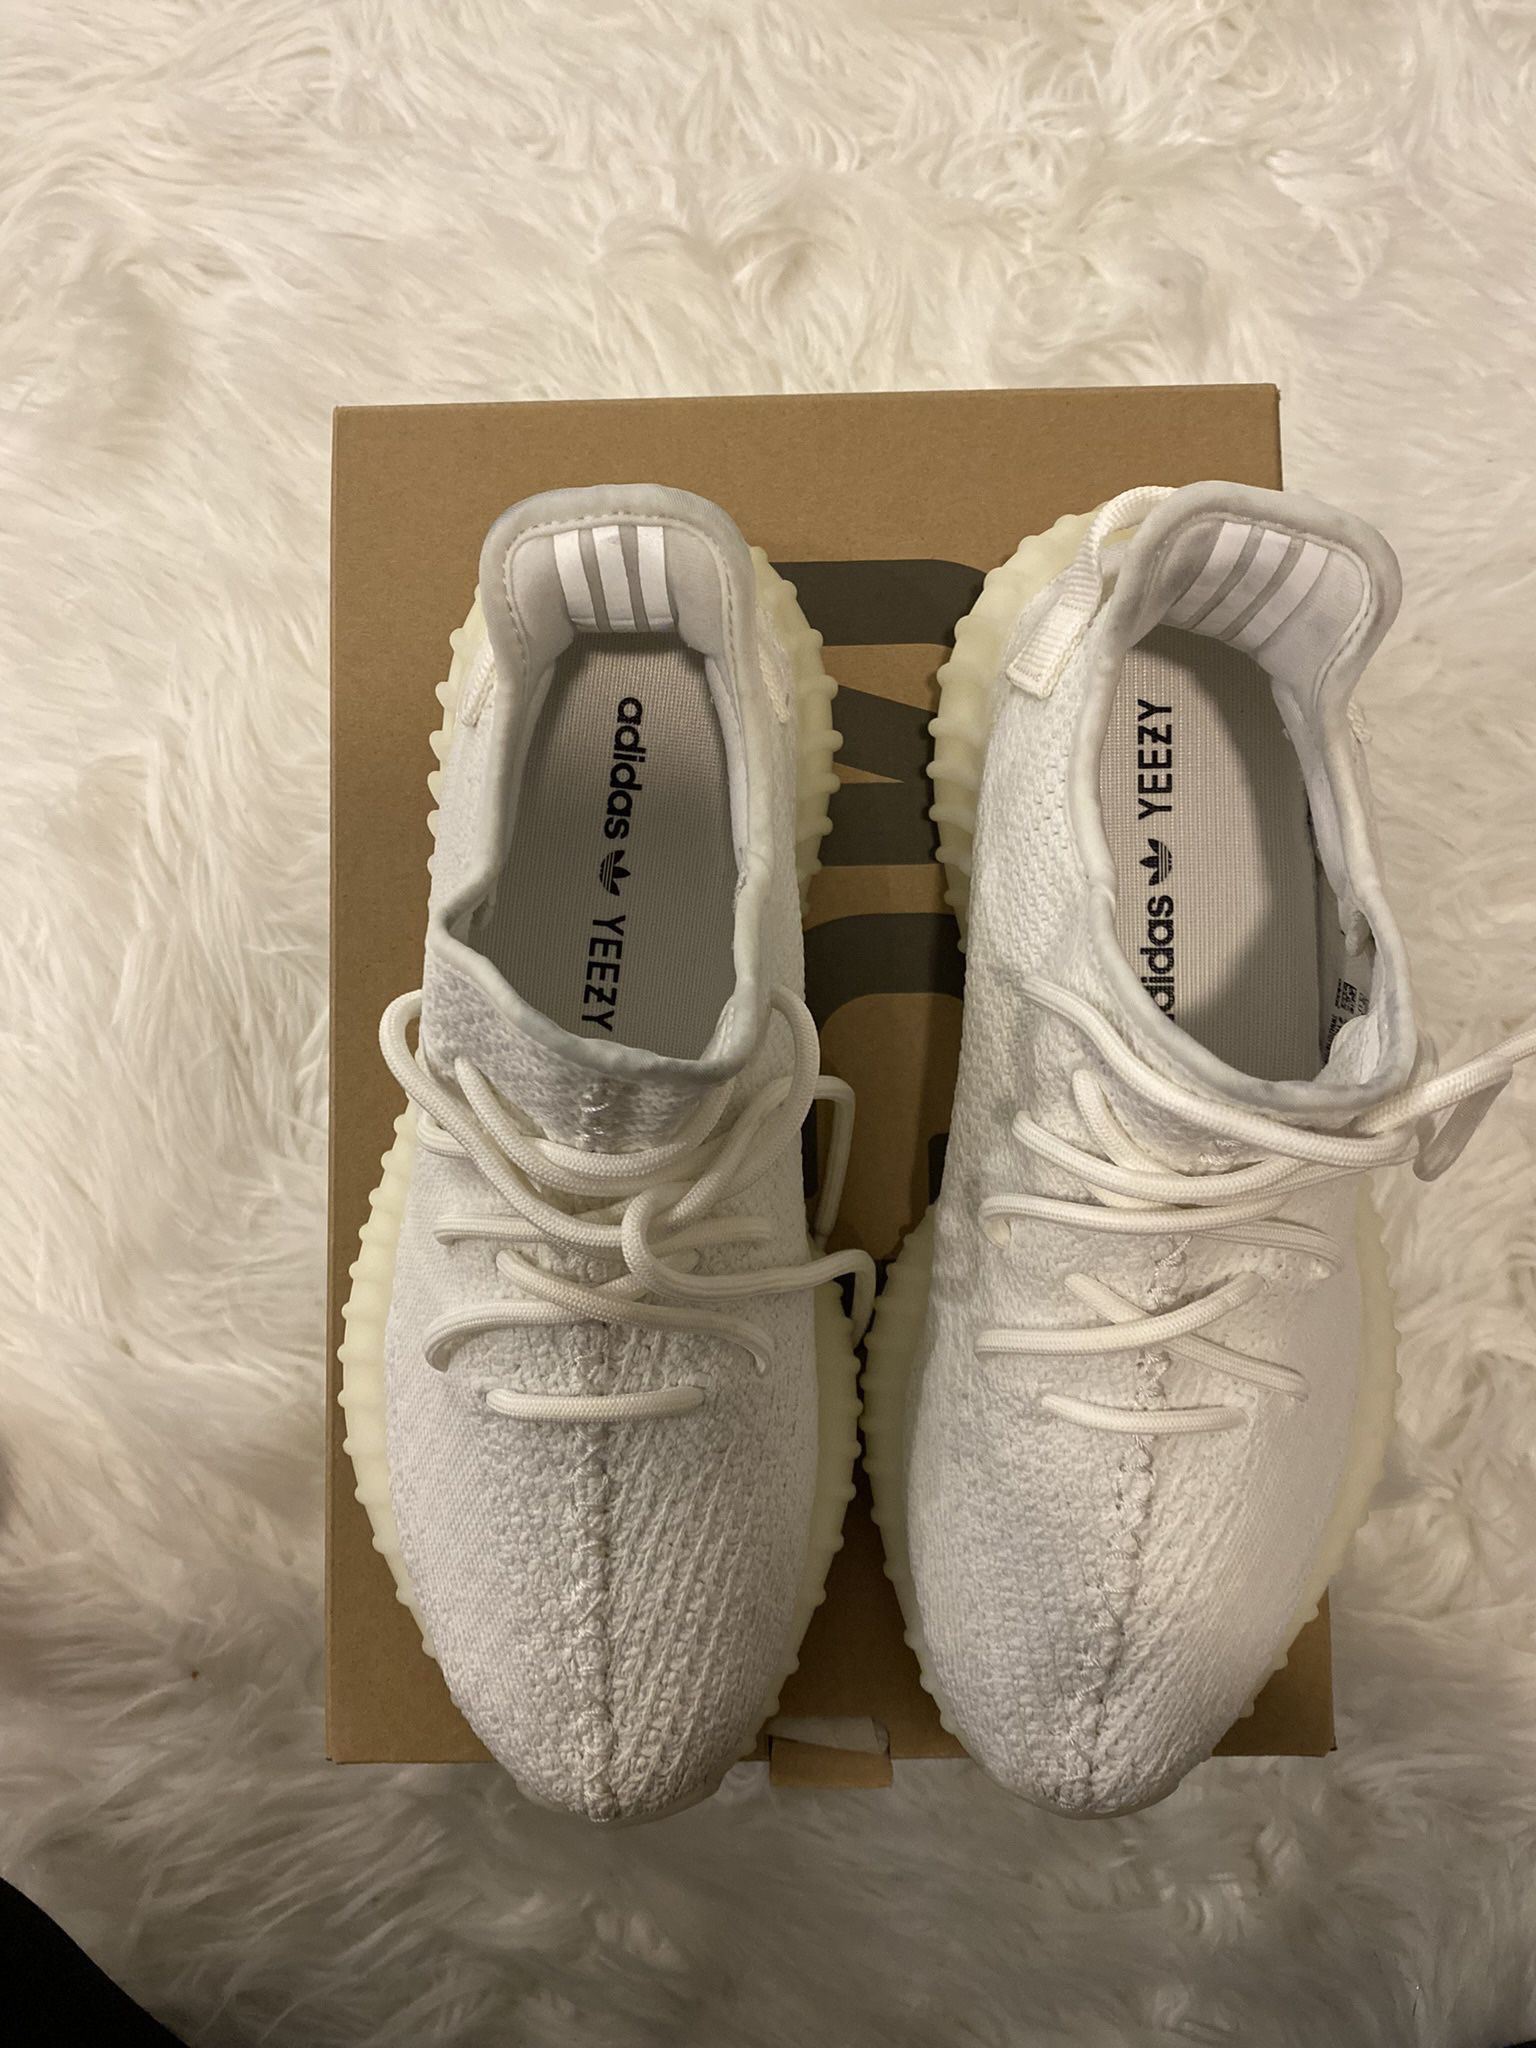 Adidas Yeezy Boost 350 White CP9366 9 - WORN ONCE for Sale in Rowlett, TX - OfferUp